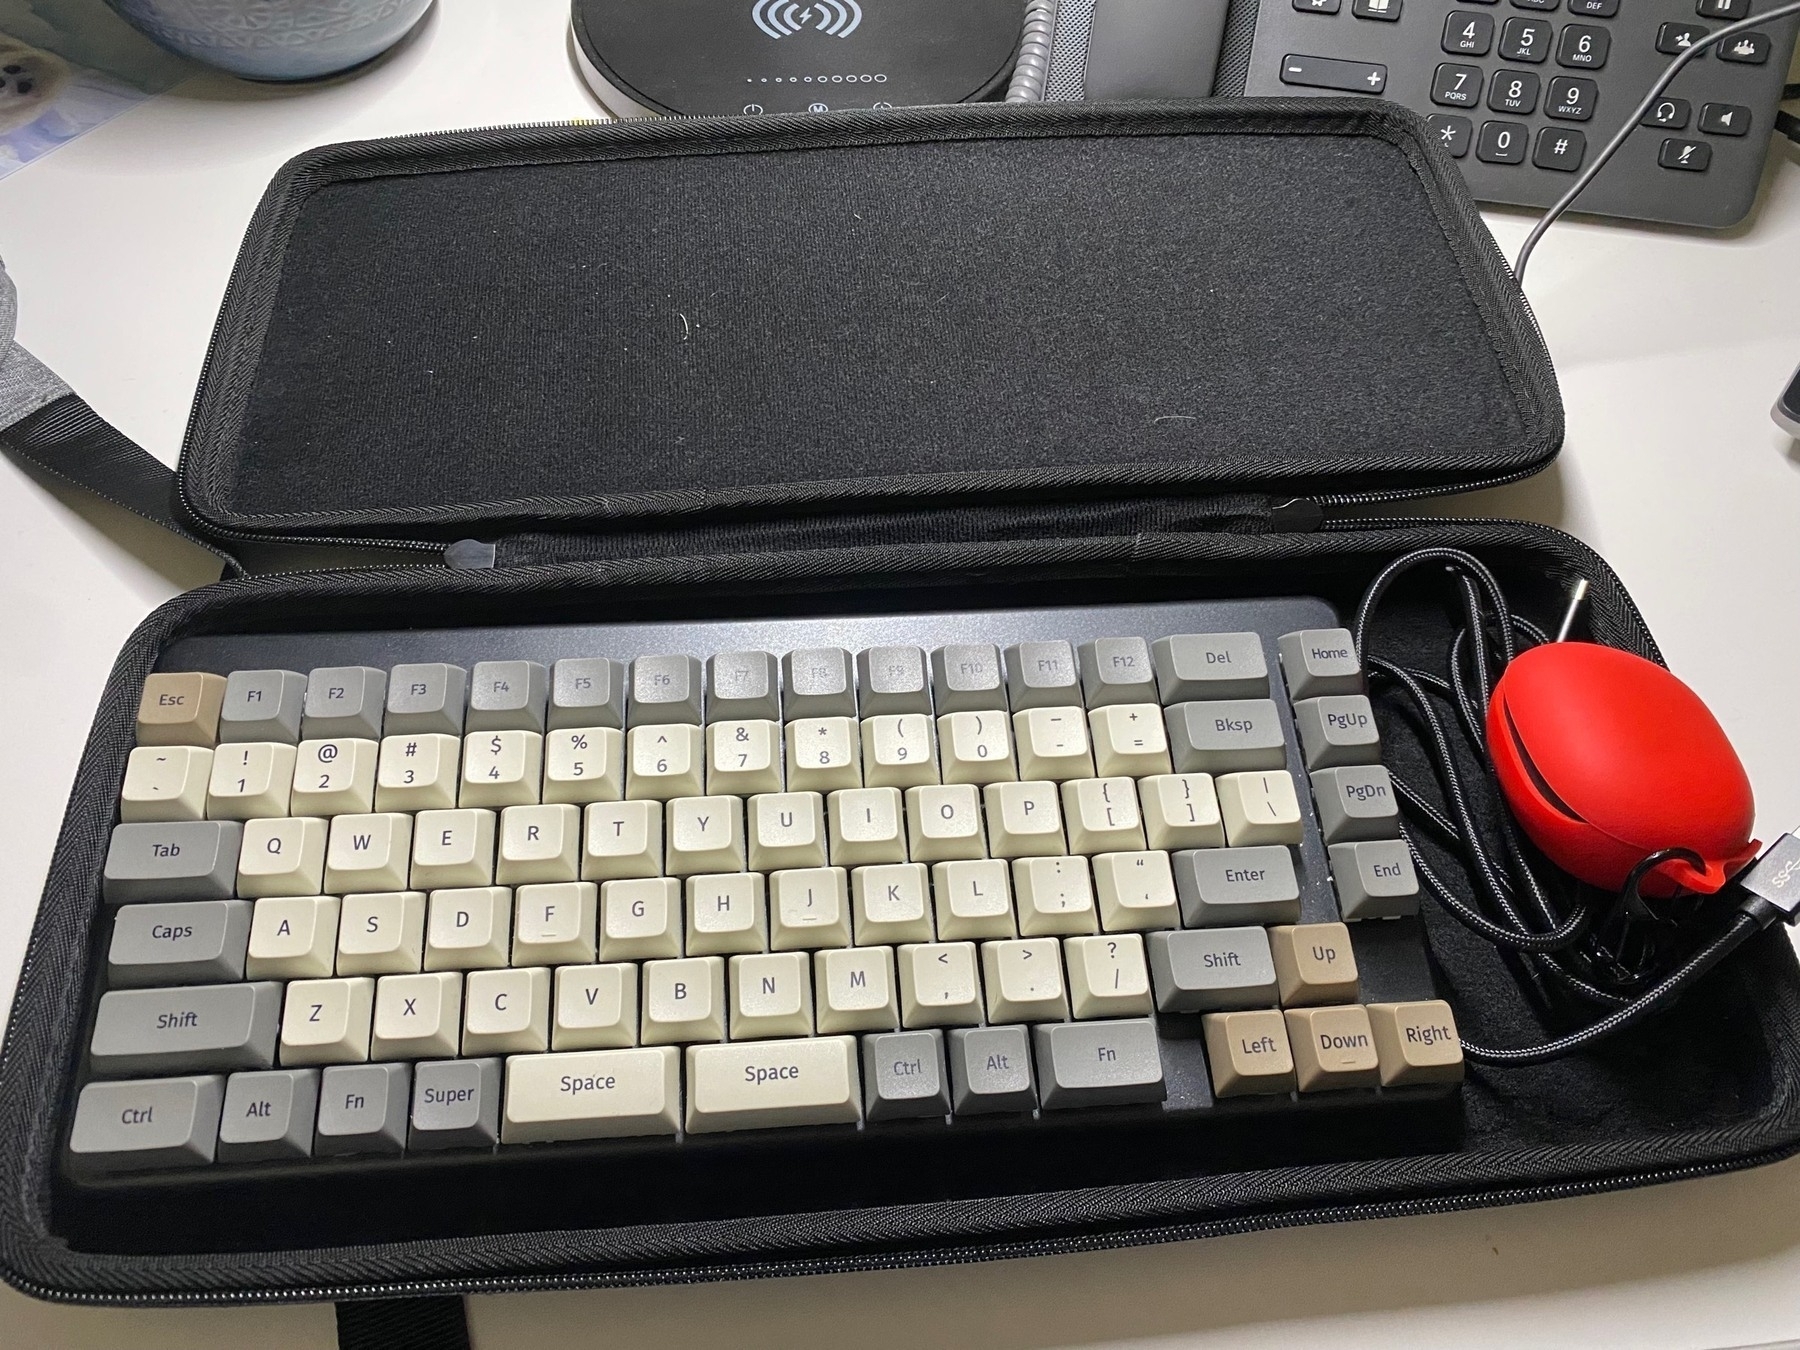 One of System 76's launch keyboards in a carrying case